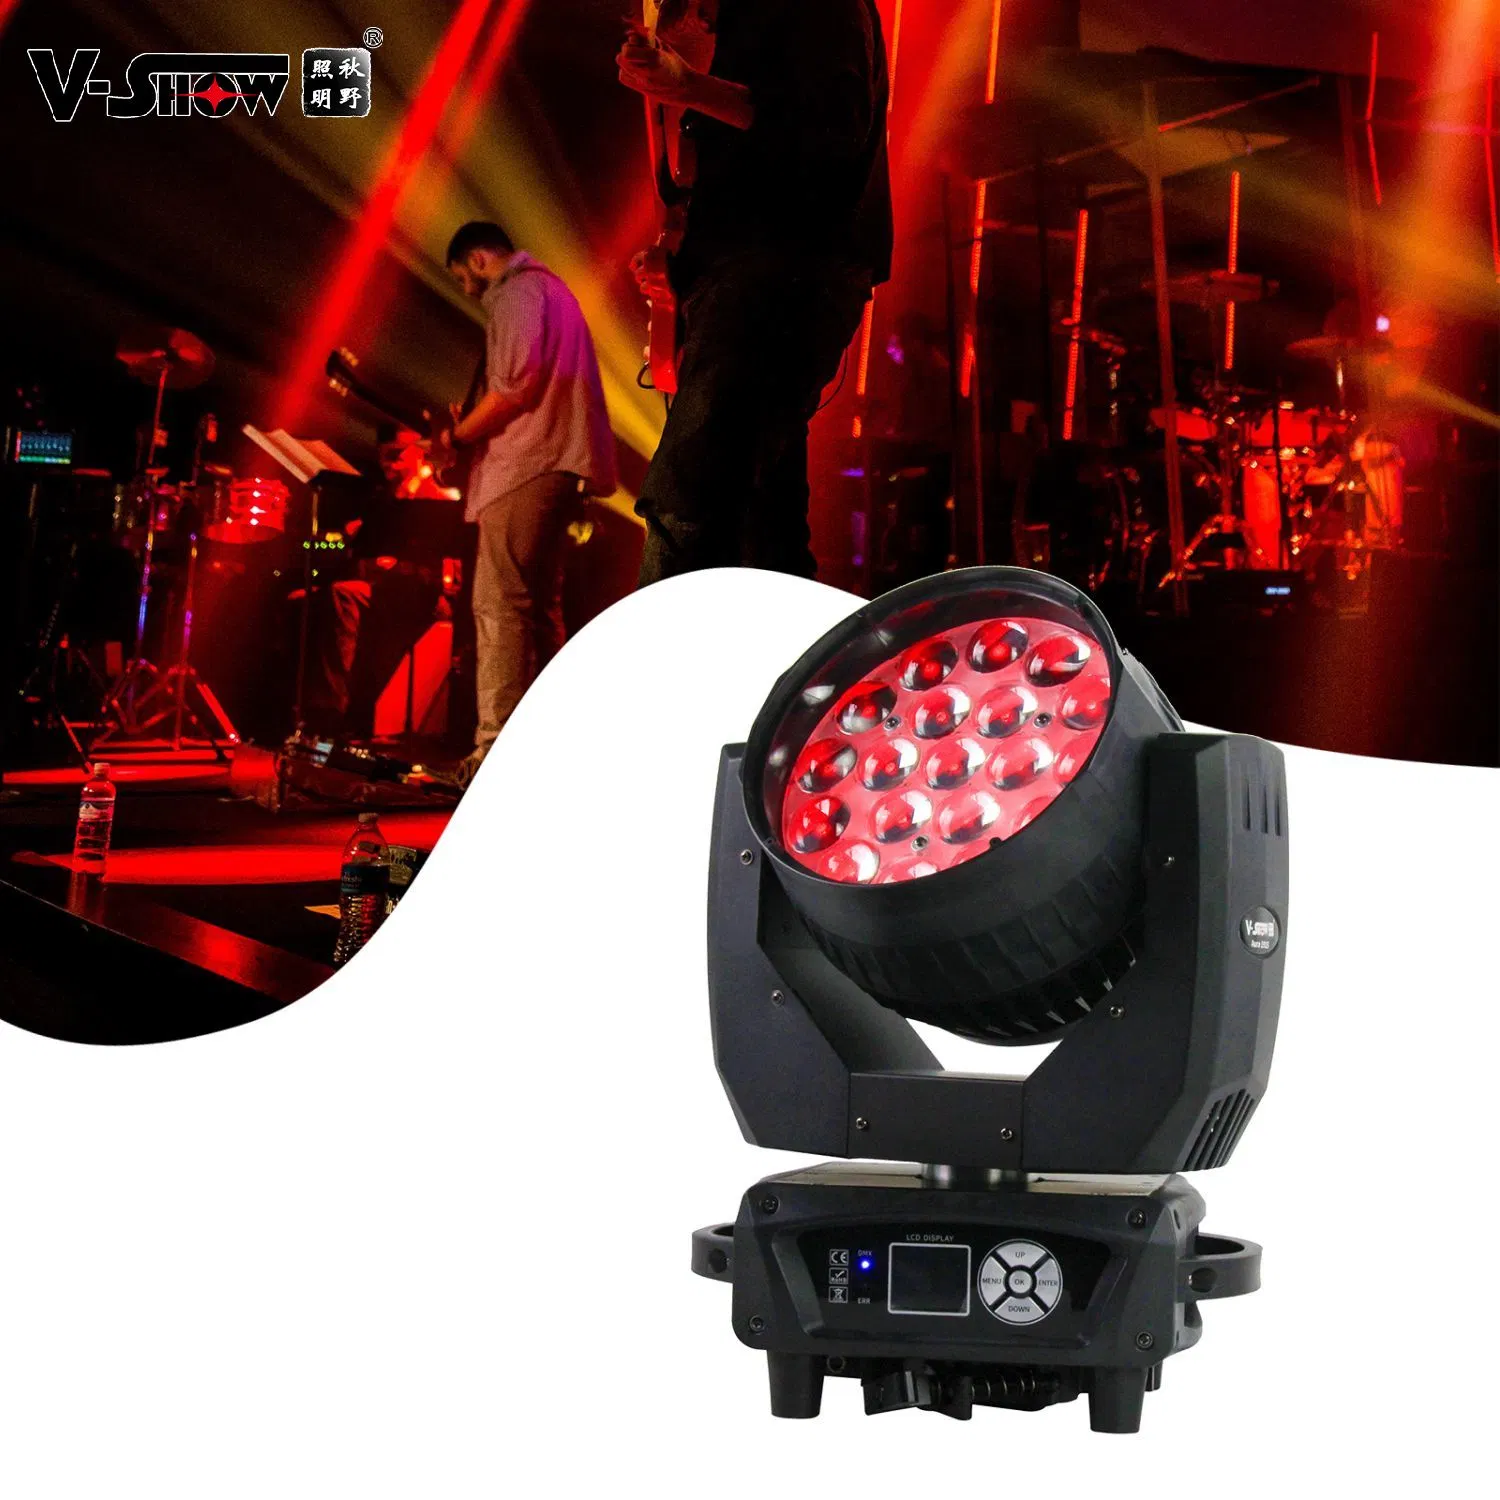 V-Show Best Aura 19*15 Watt Moving Head Wash Light RGBW 4in1 LED Beam Wash Moving Head Light with Backlight Zoom Function Stage Light for DJ Disco Bar